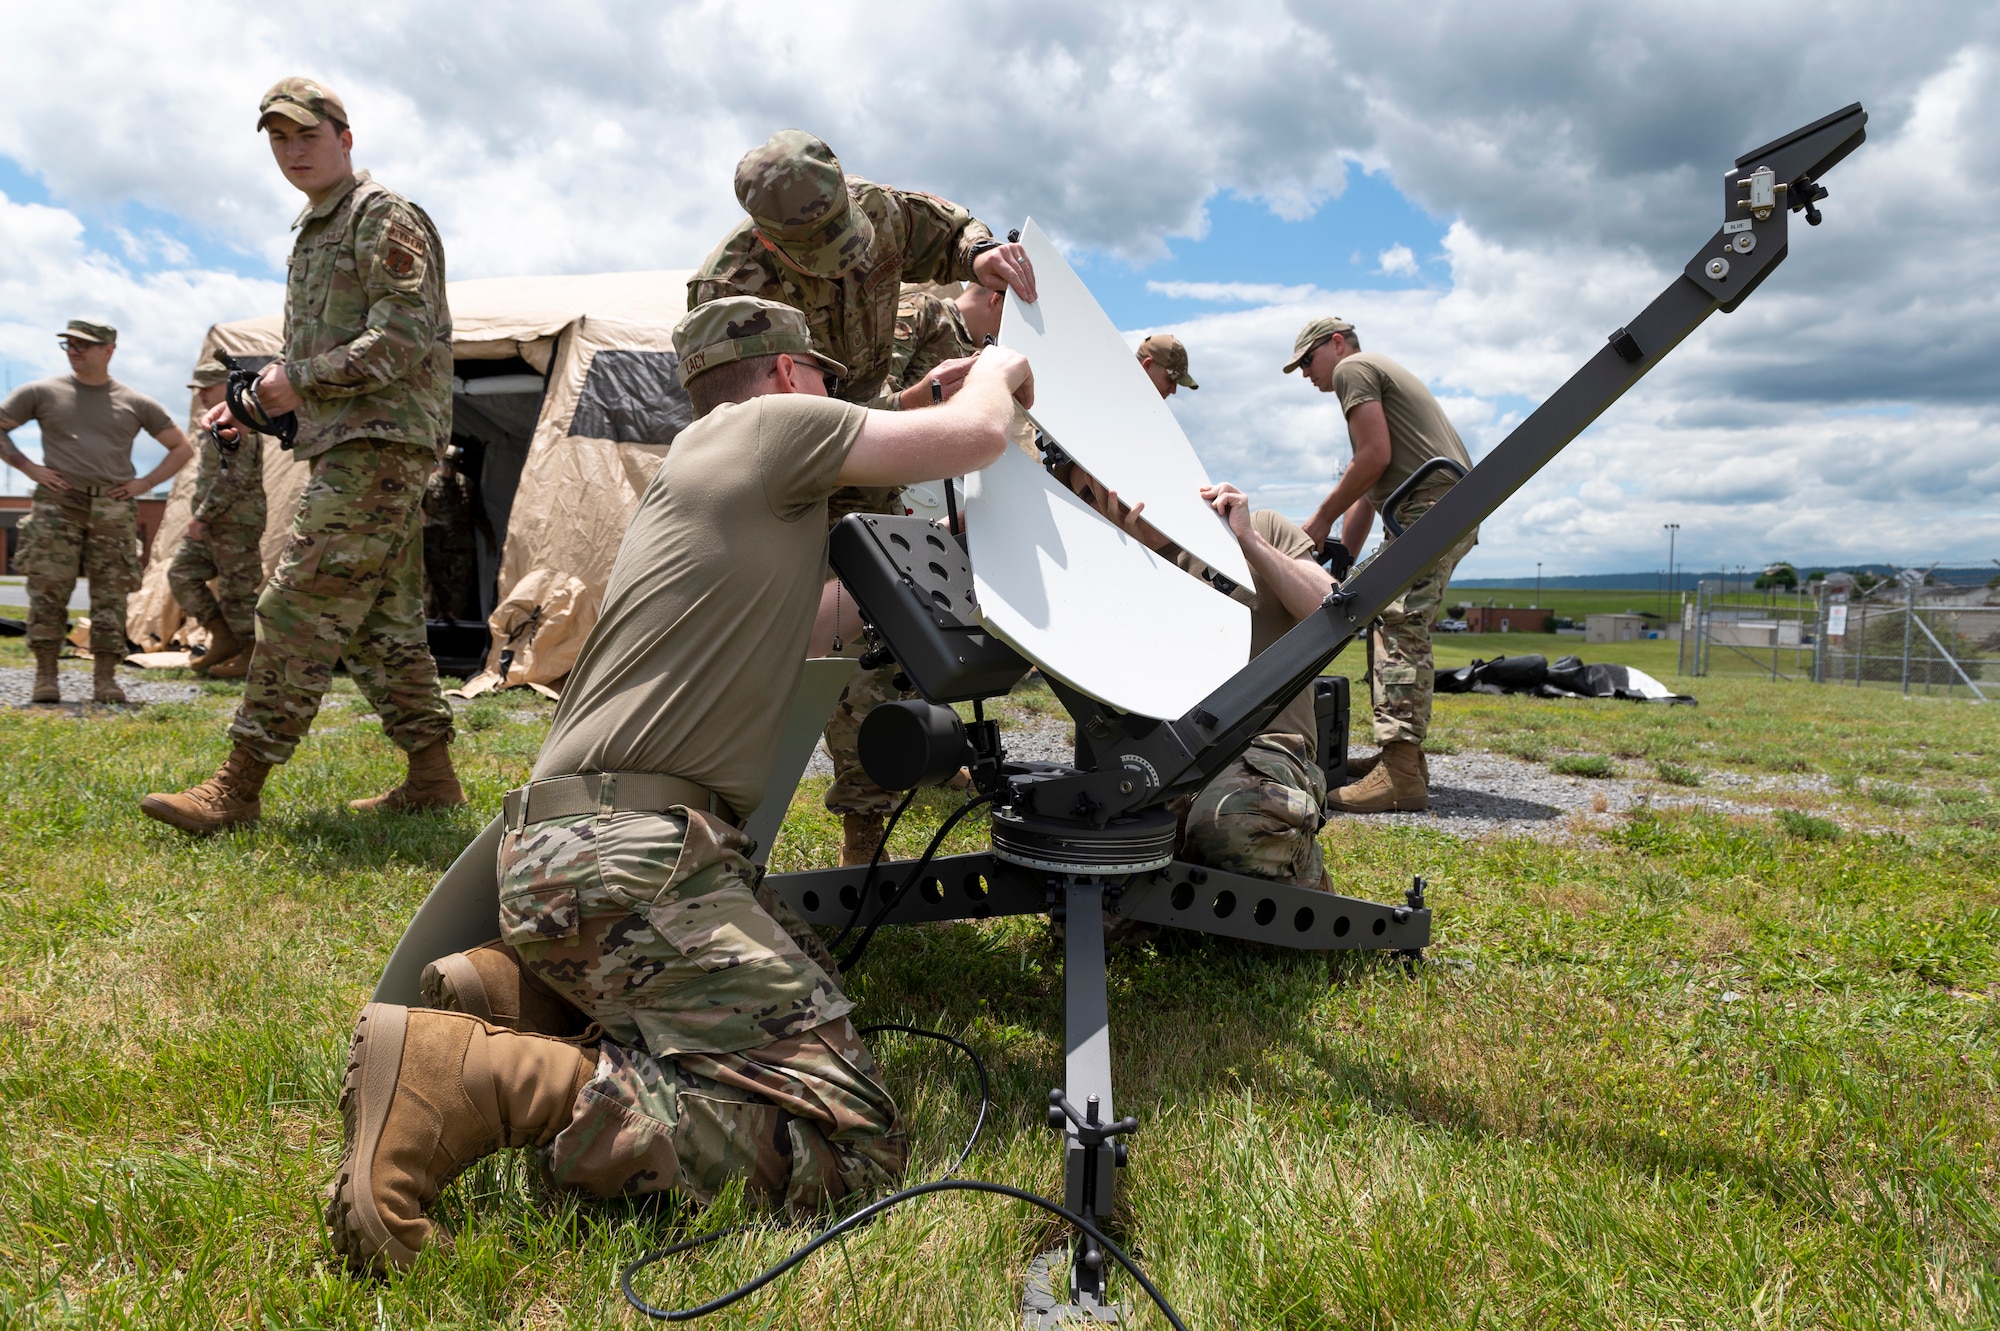 U.S. Air Force Tech. Sgt. Phillip Lacy and Master Sgt. Jacob Kent, cyber security specialists with the 167th Communications Squadron, disassemble a satellite component during a joint incident site communications capability (JISCC) training event at the 167th Airlift Wing, Martinsburg, West Virginia, June 9, 2022. The JISCC system allows communication between civilian and military partners in environments where communication assets are not available